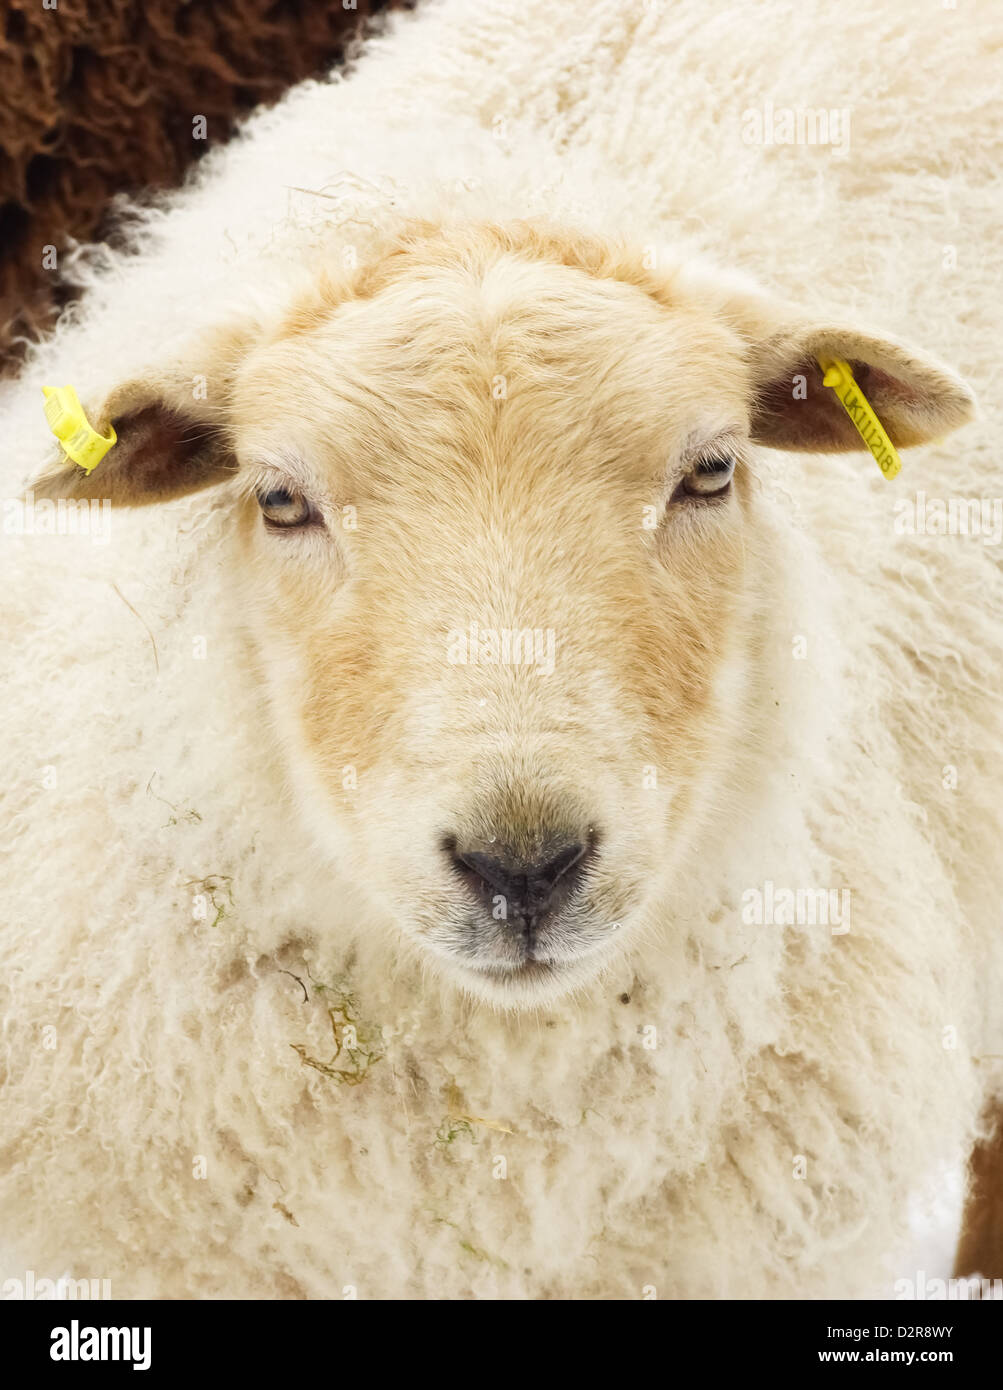 A Young Sheep Stock Photo